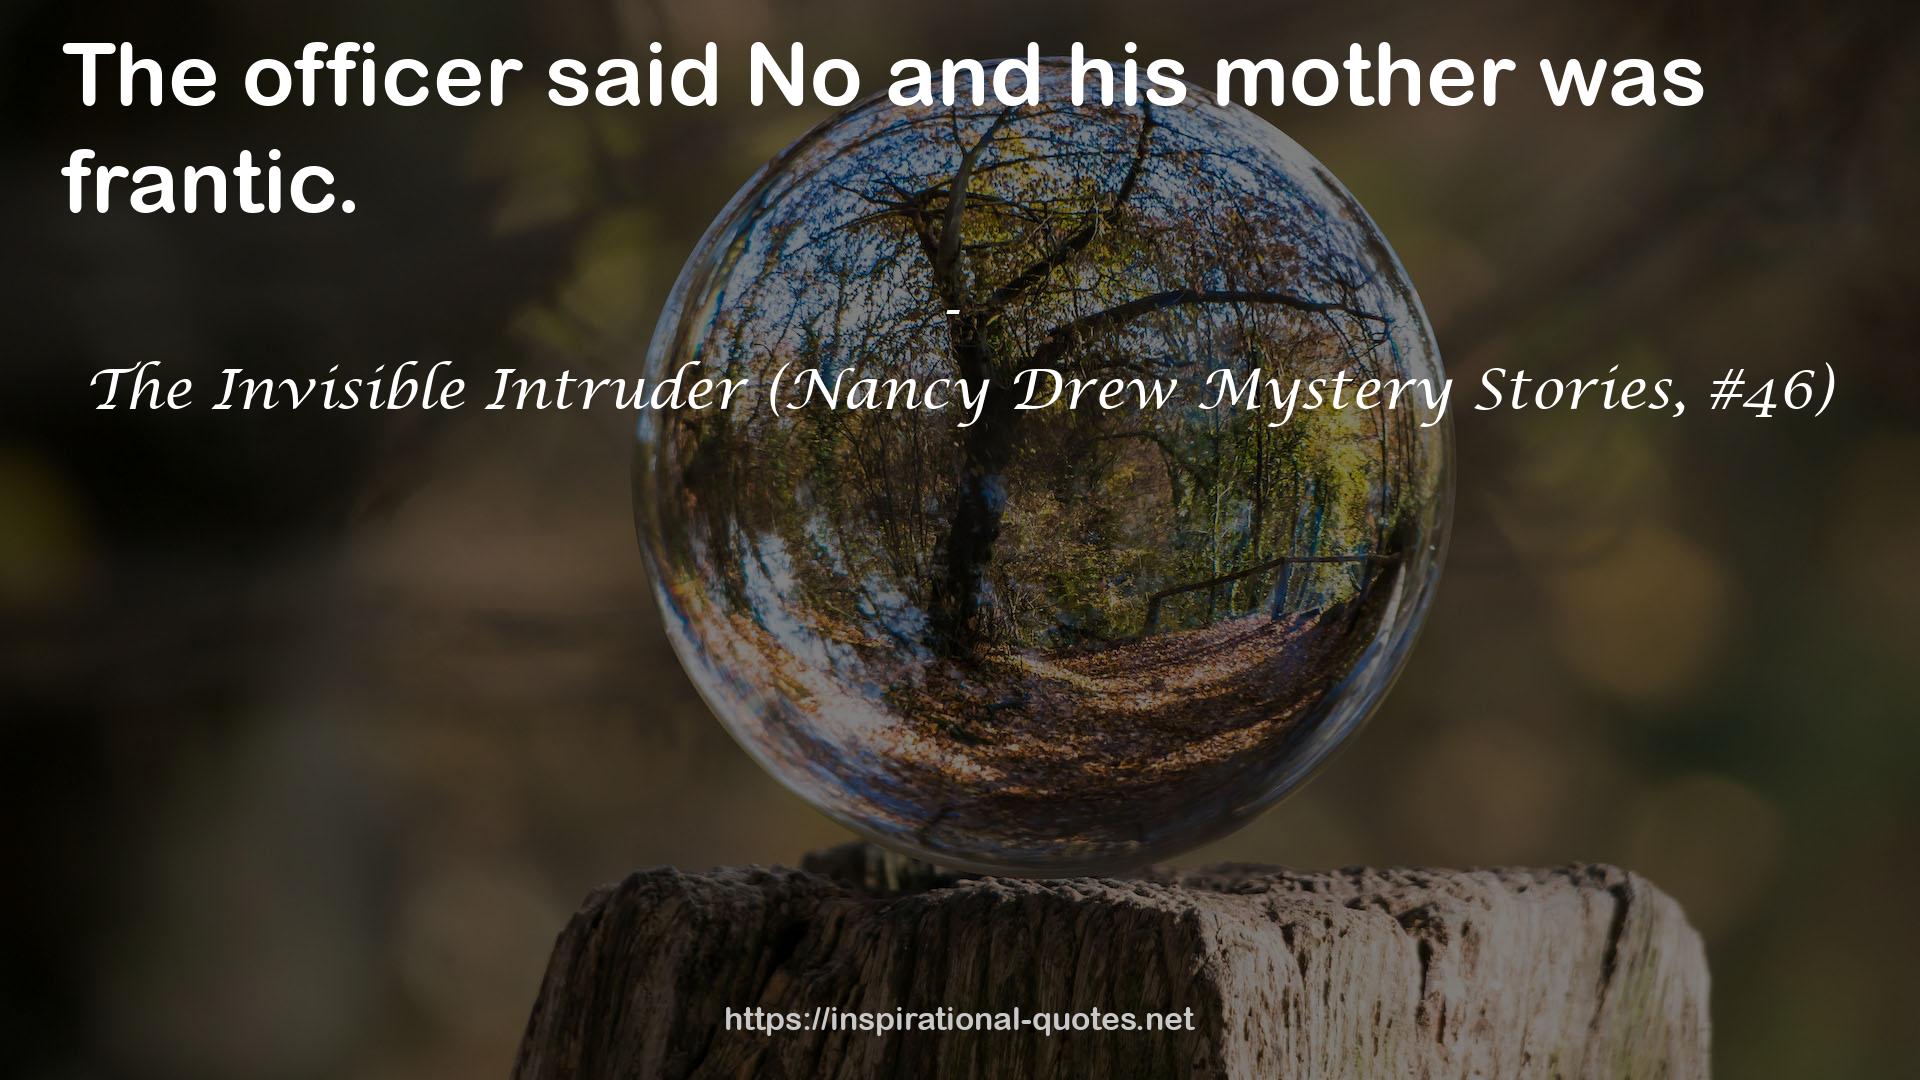 The Invisible Intruder (Nancy Drew Mystery Stories, #46) QUOTES